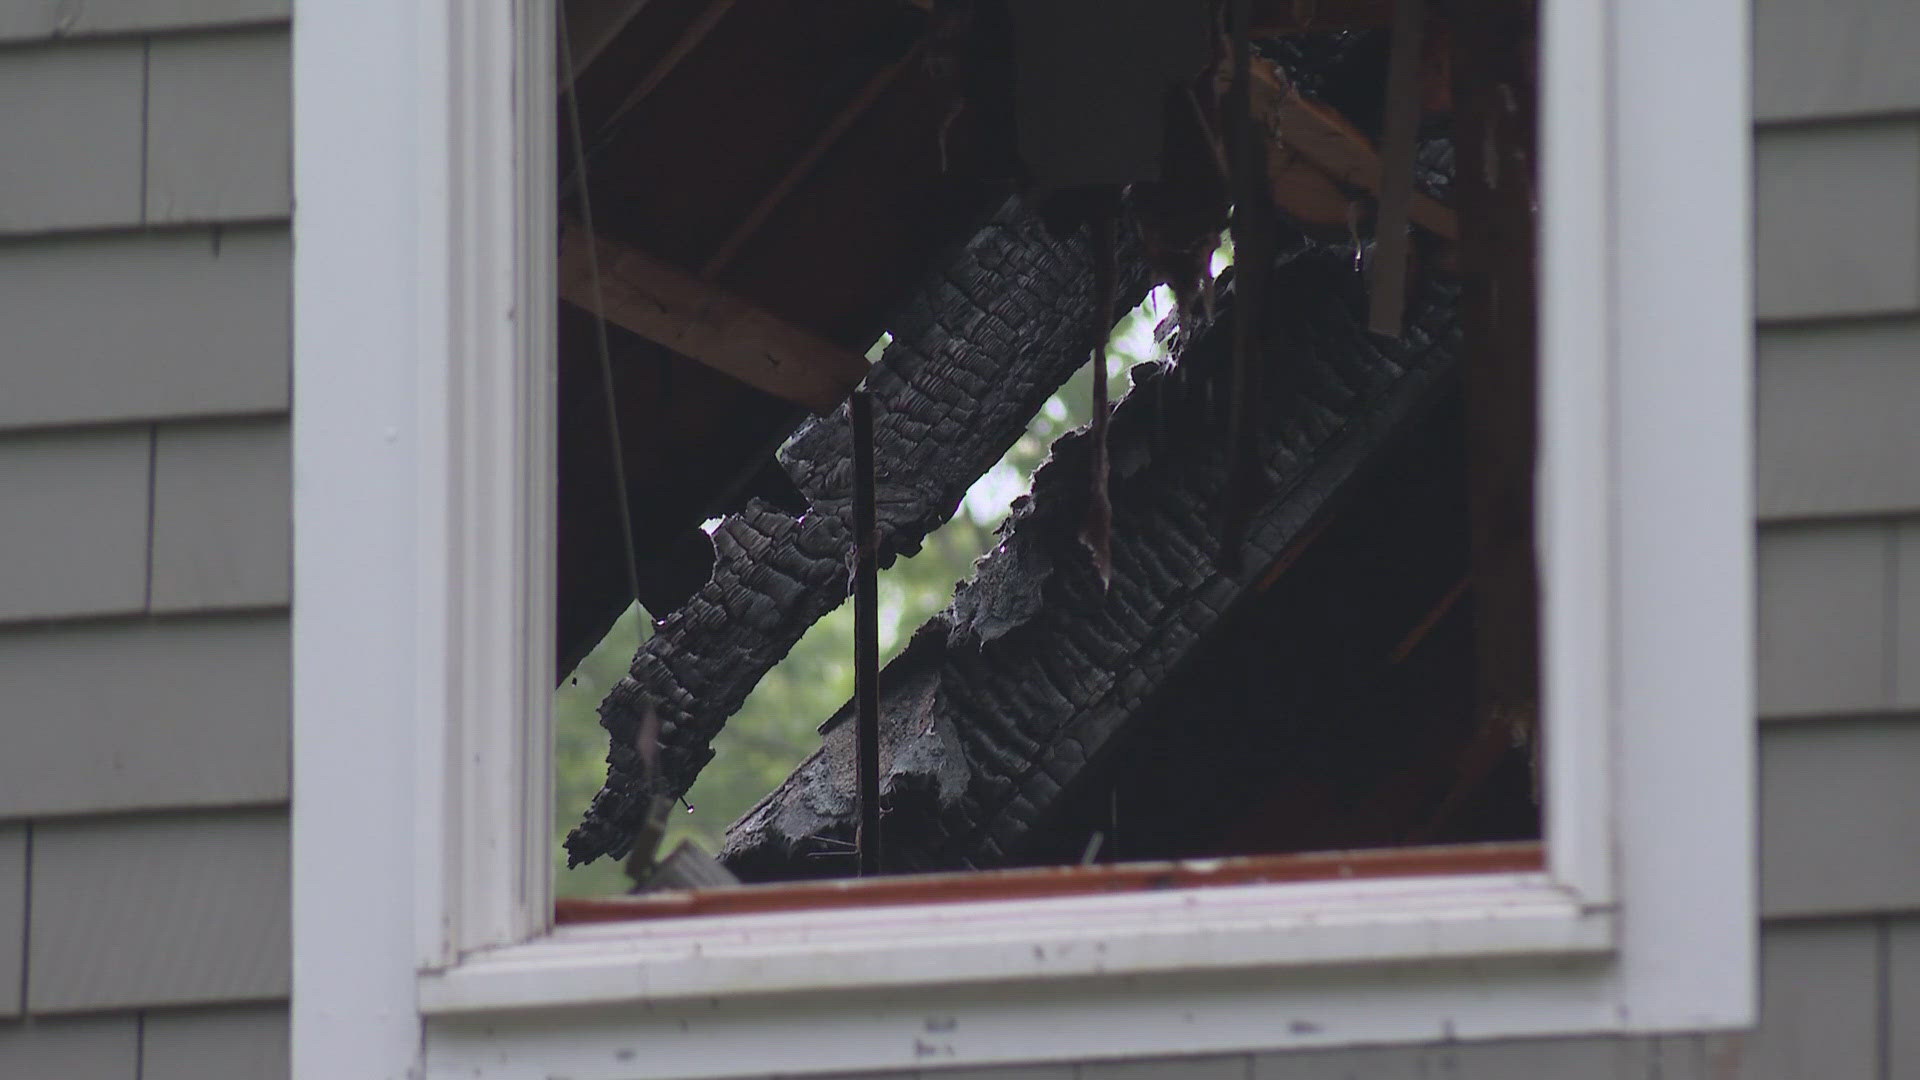 Yarmouth's fire chief told NEWS CENTER Maine the home's garage was destroyed in the fire. No injuries were reported.